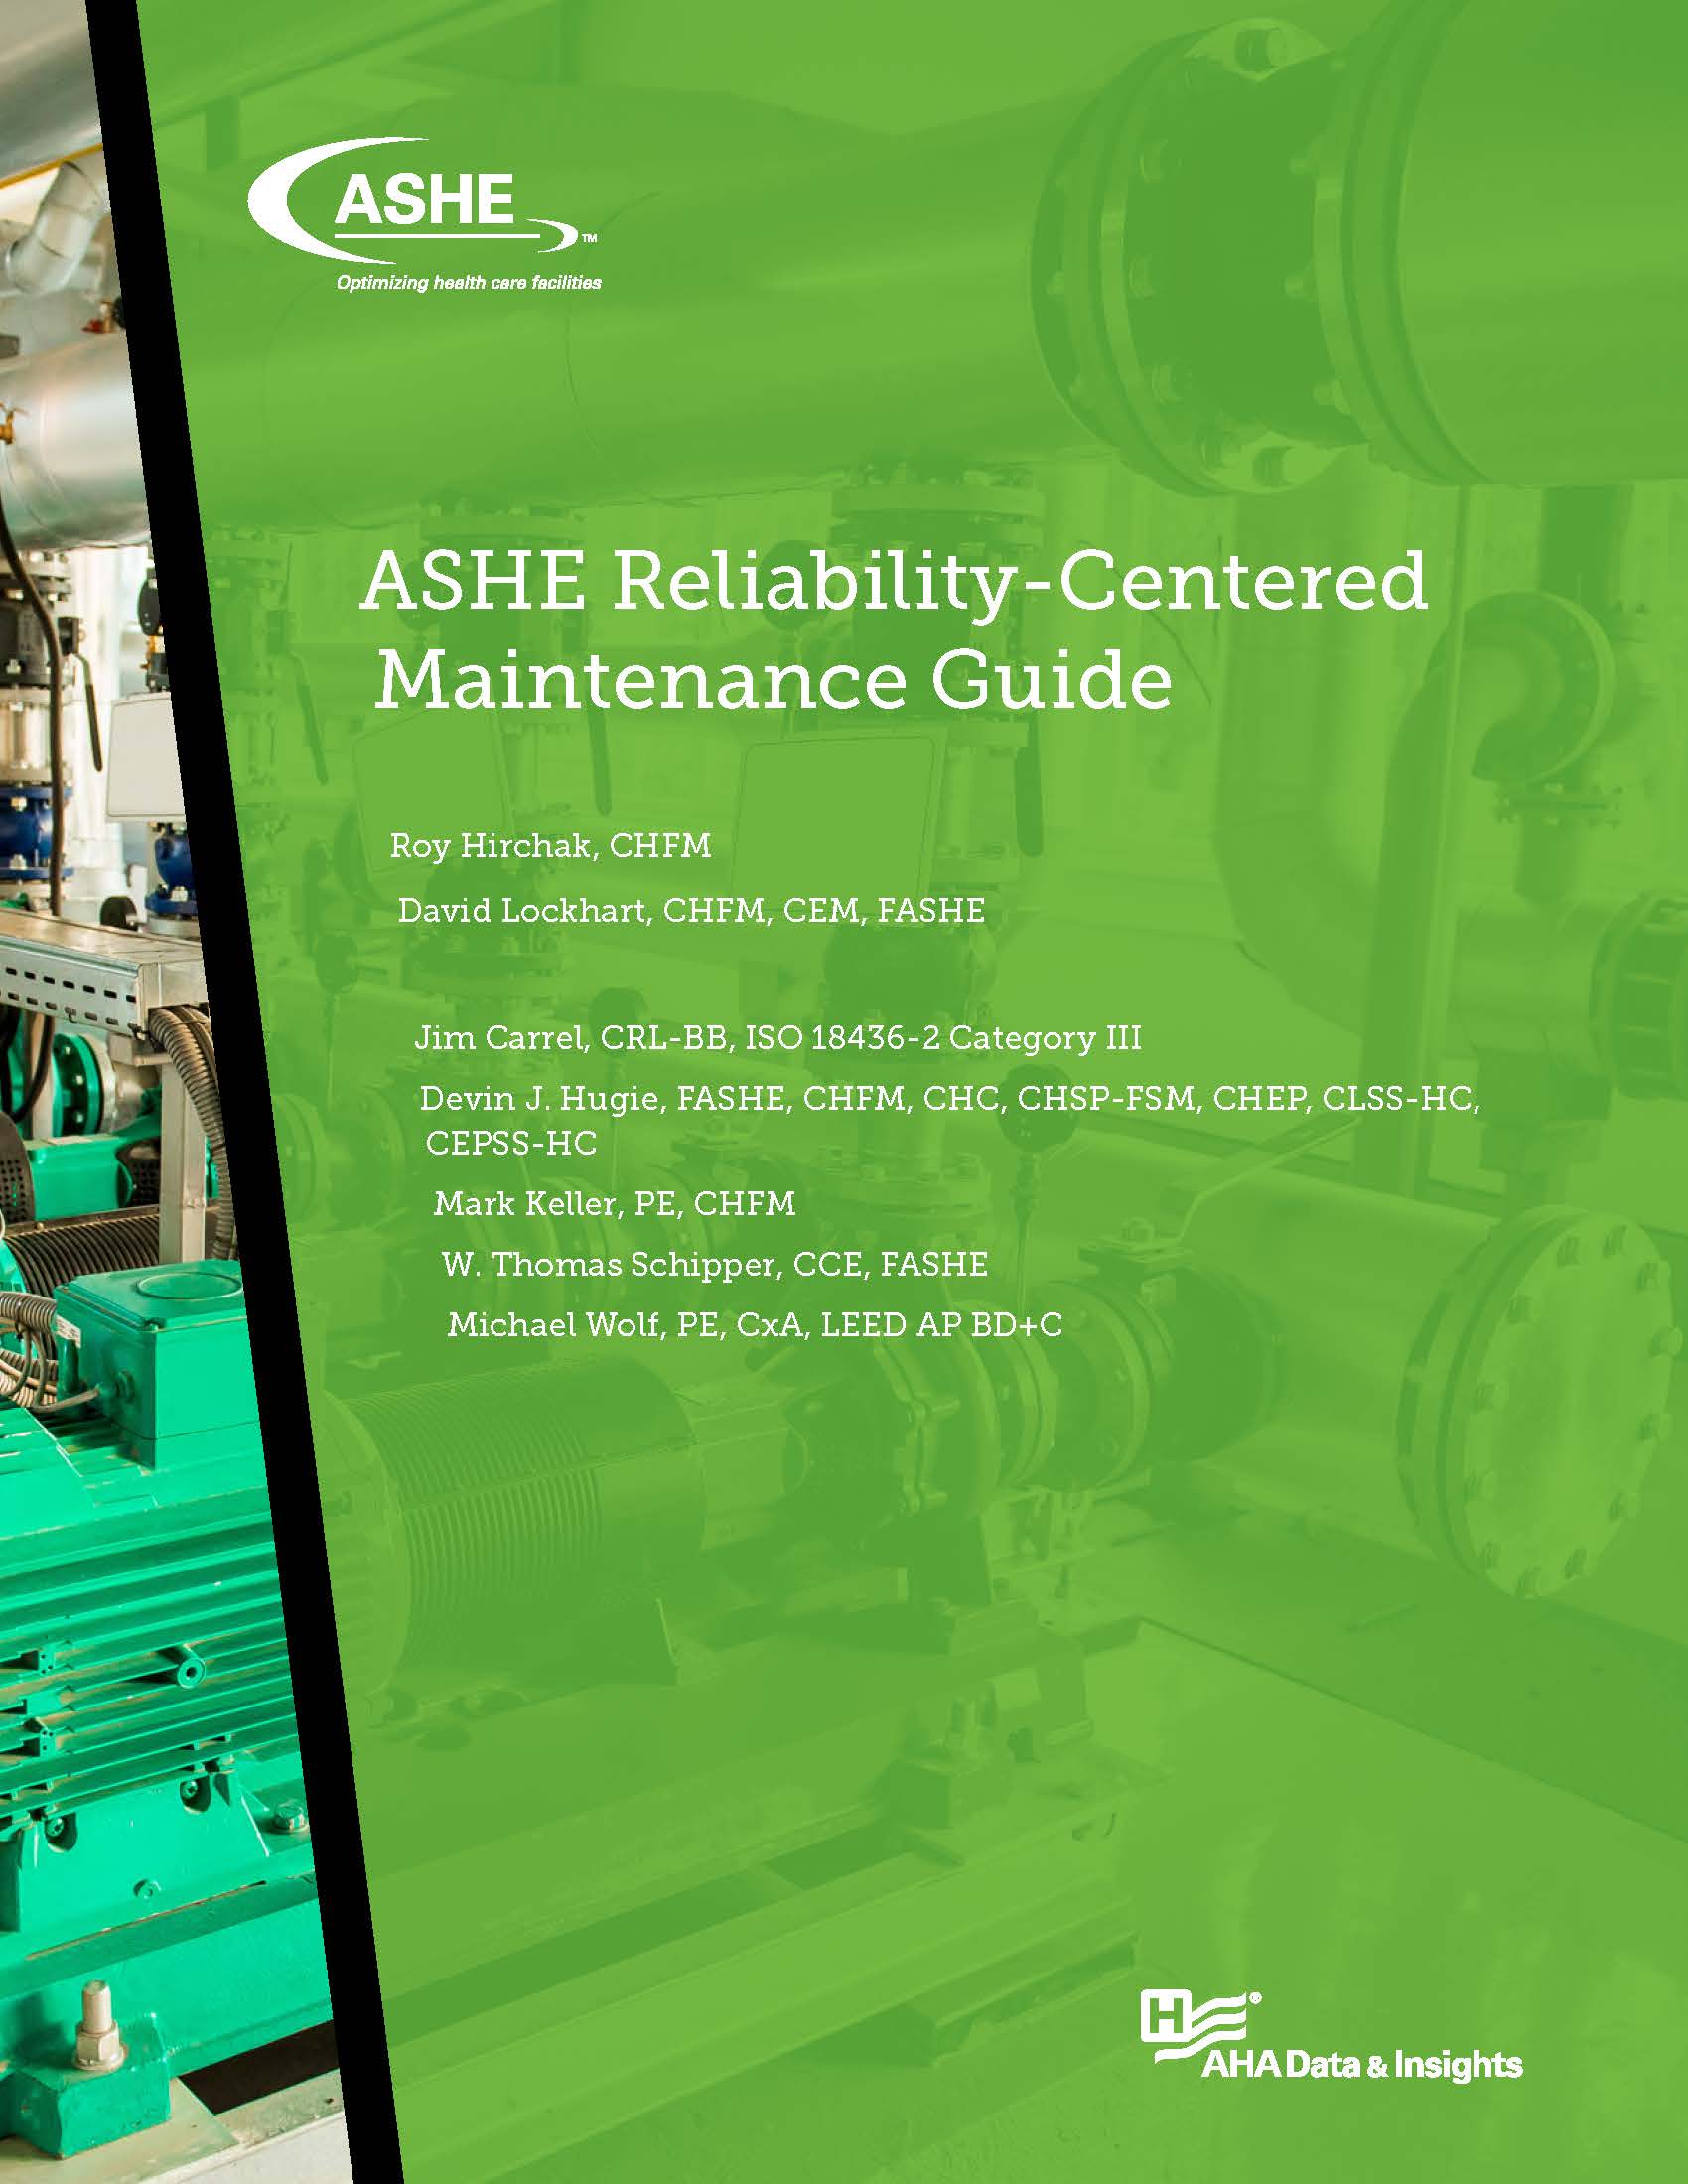 ASHE Reliability-Centered Maintenance Guide - Digital Edition